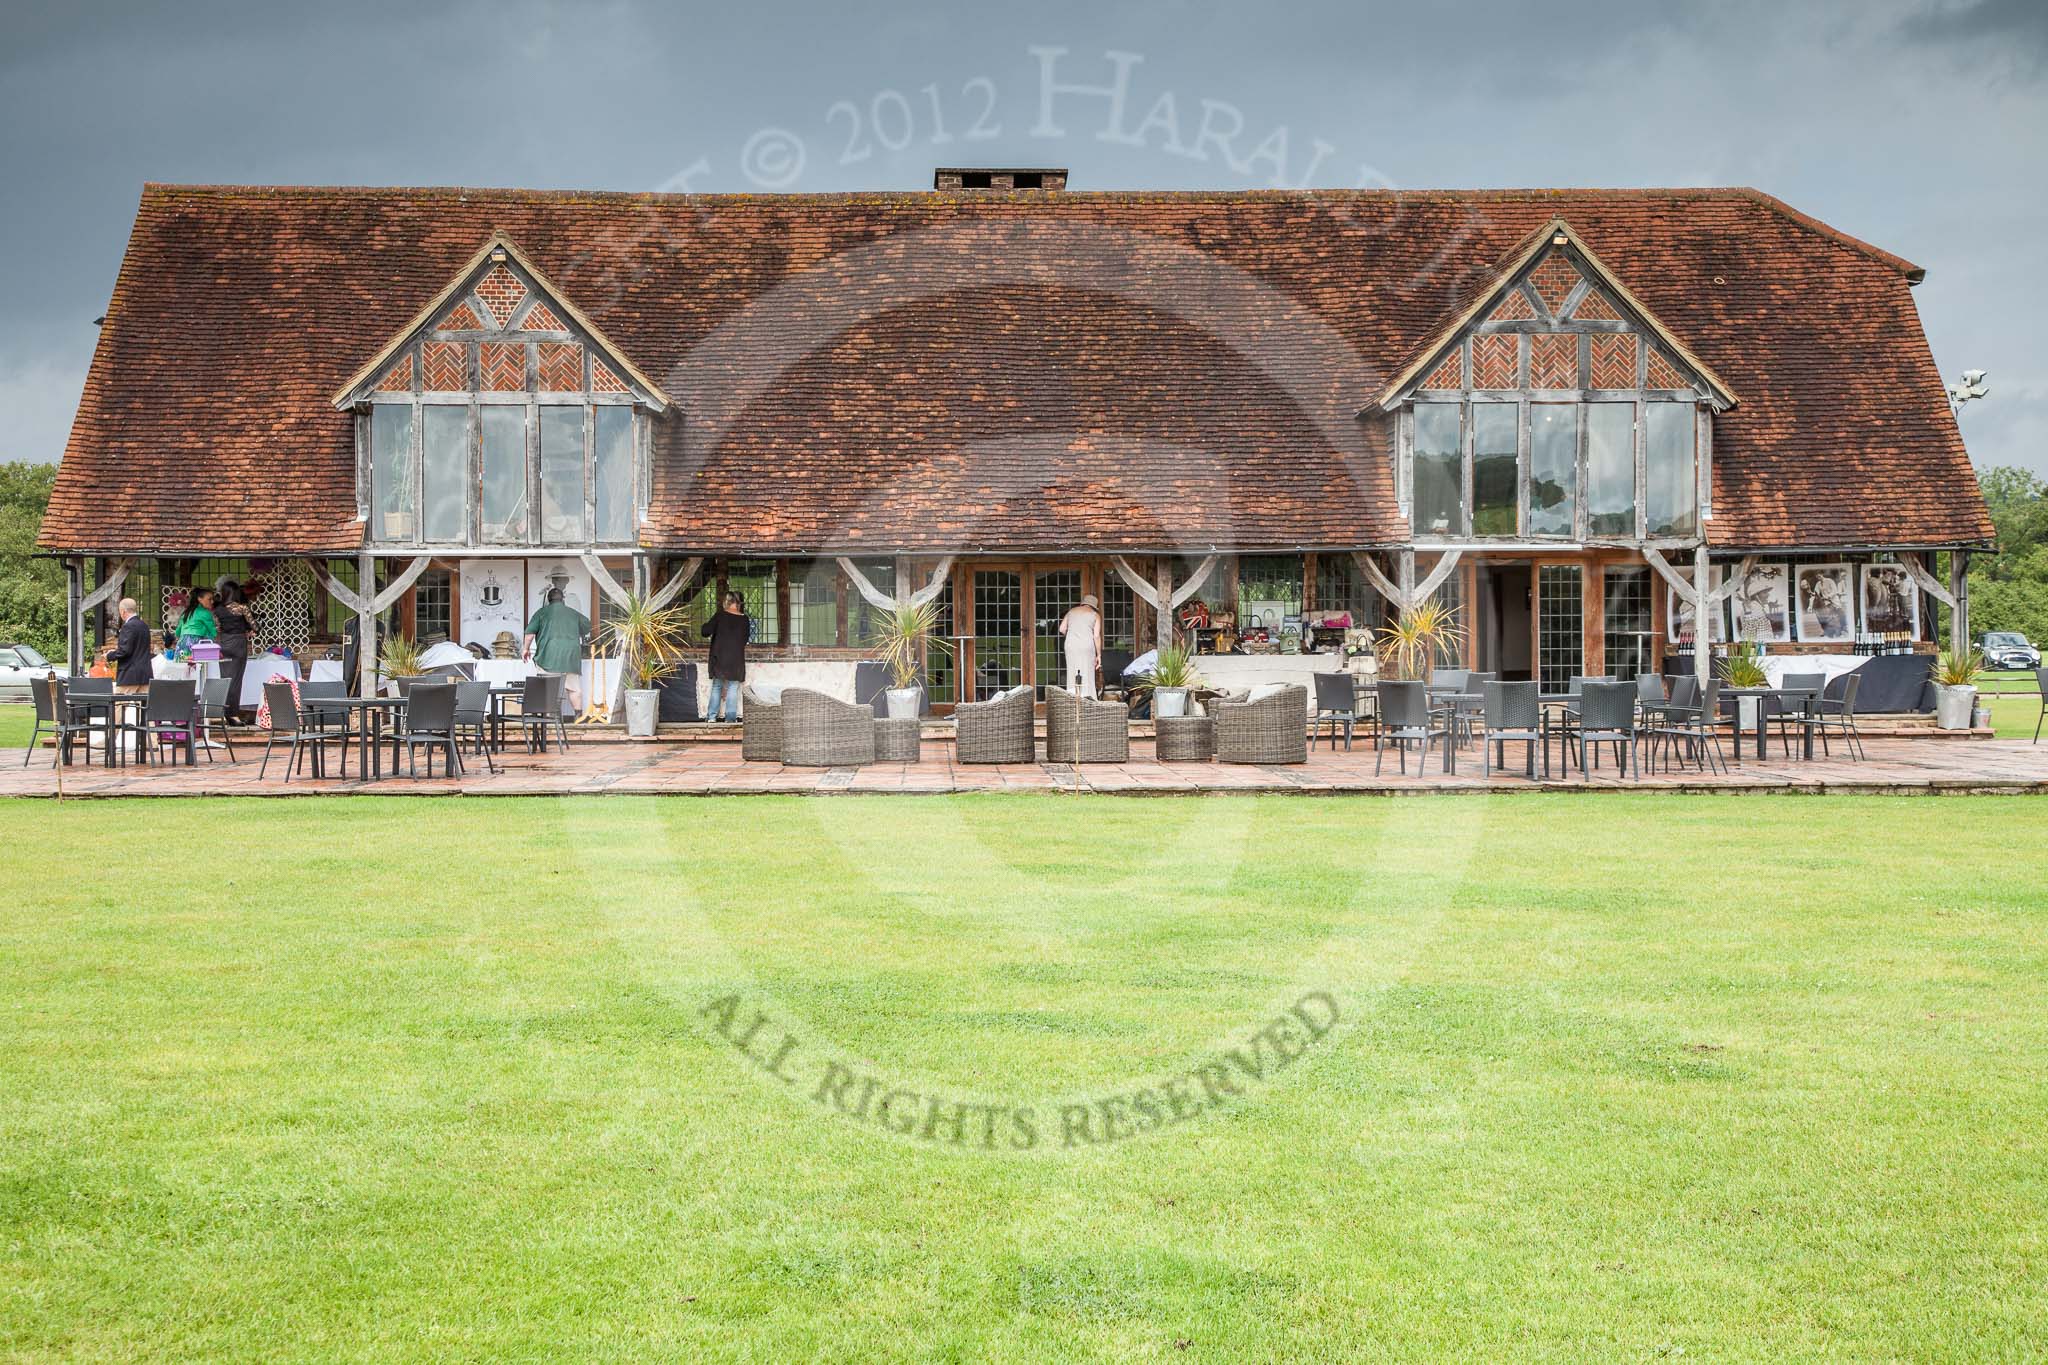 7th Heritage Polo Cup finals: The clubhouse of Hurtwood Park Polo Club near Ewhurst in Surrey..
Hurtwood Park Polo Club,
Ewhurst Green,
Surrey,
United Kingdom,
on 05 August 2012 at 11:42, image #1